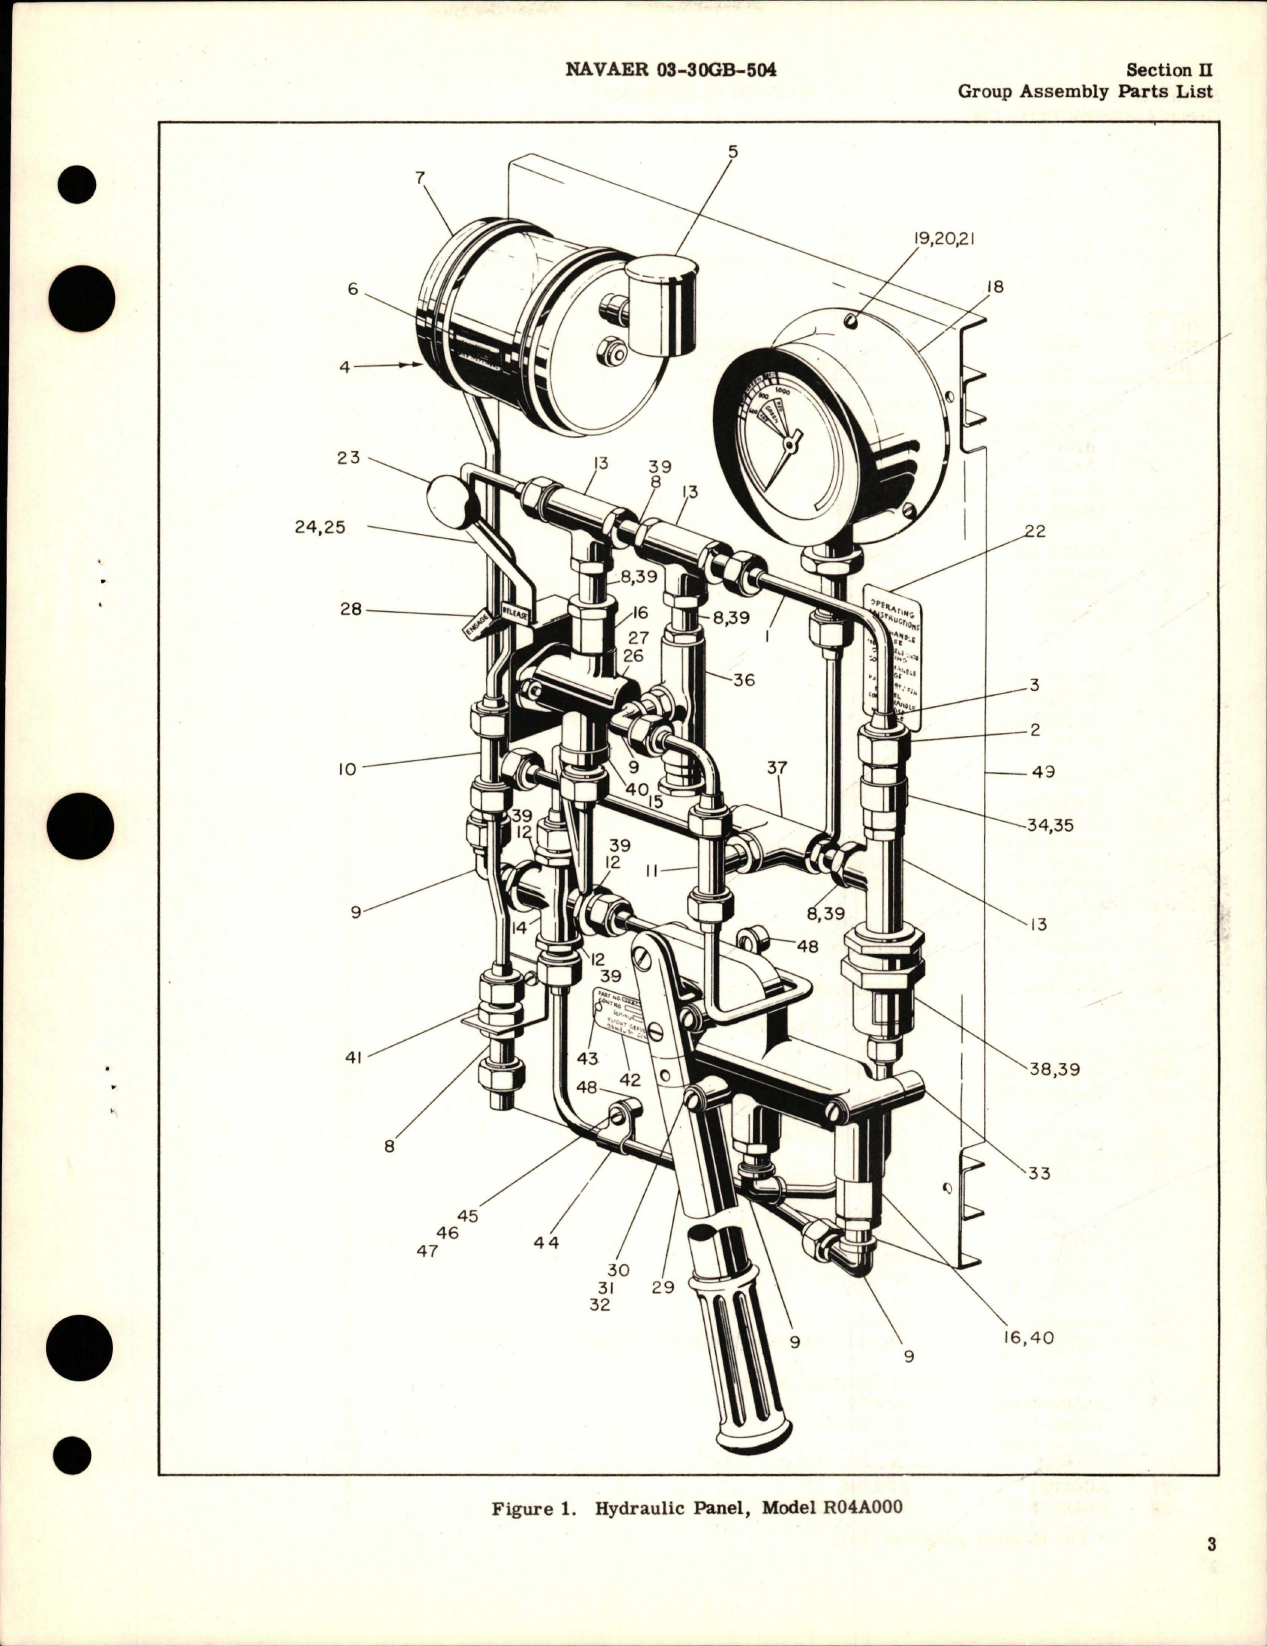 Sample page 5 from AirCorps Library document: Illustrated Parts Breakdown for Hydraulic Panel - Part R04A000